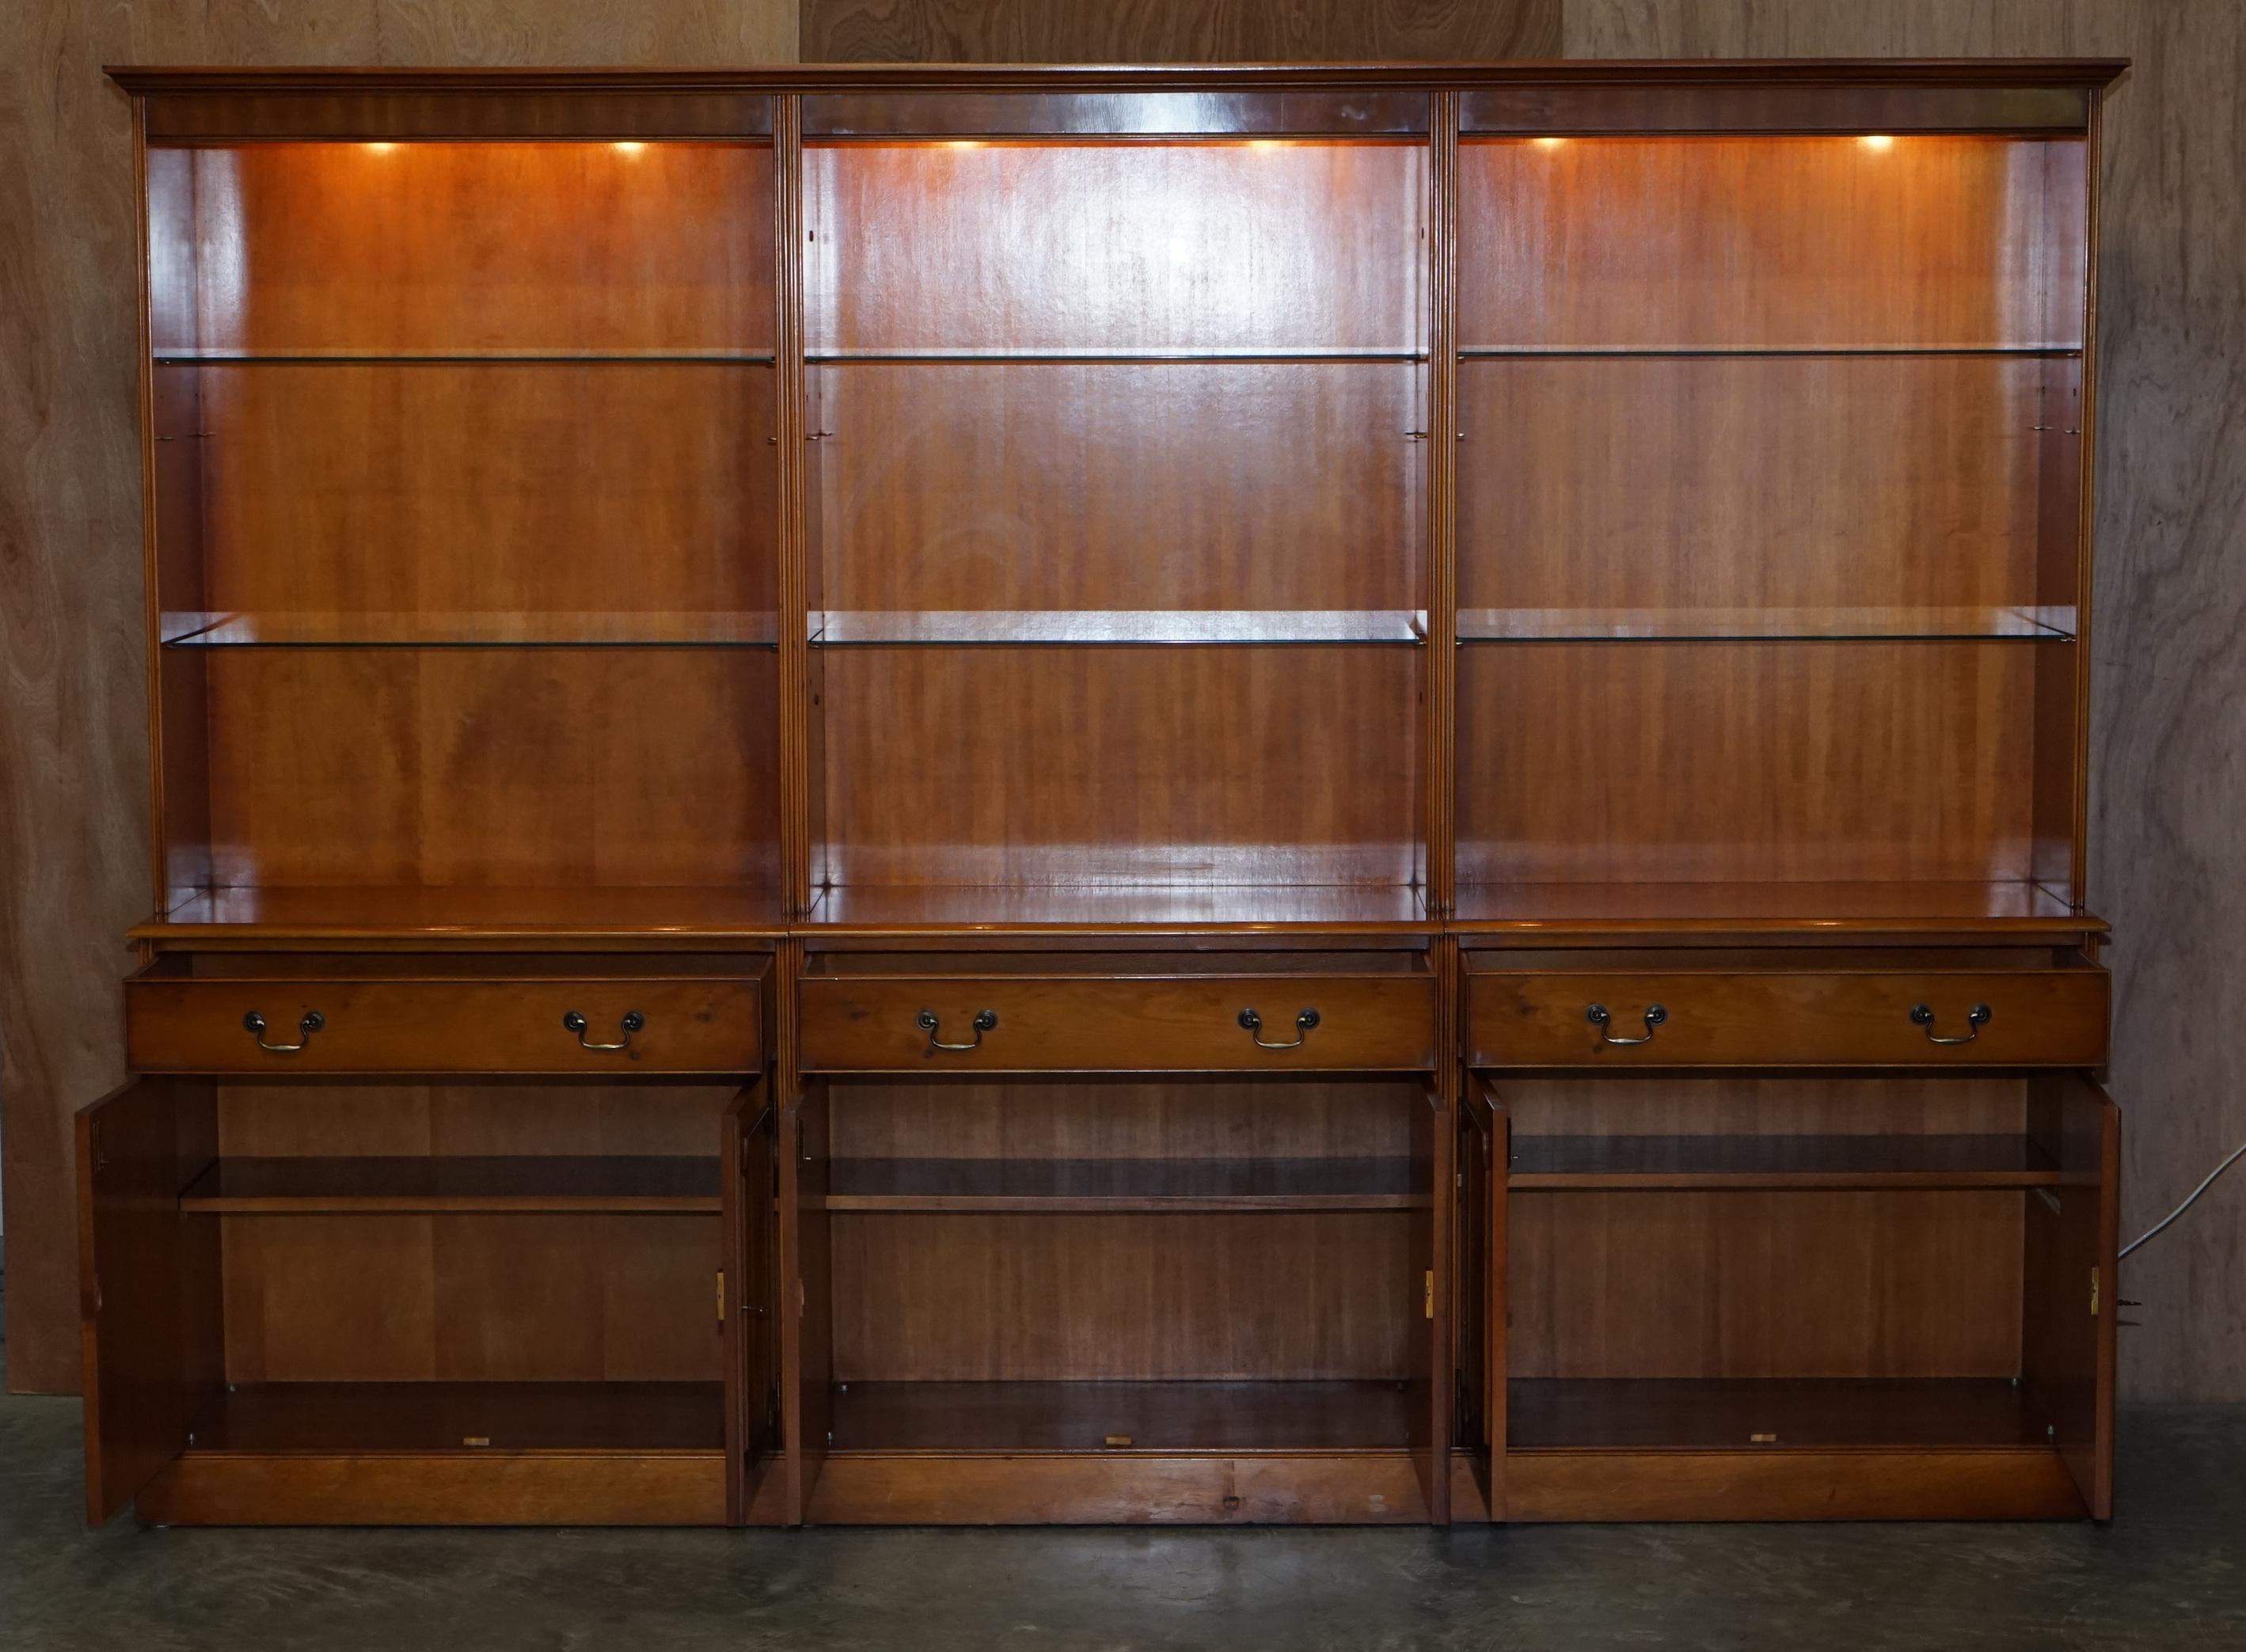 Triple Bank Bradley Furniture Burr Yew Wood Library Display Bookcase with Lights 3